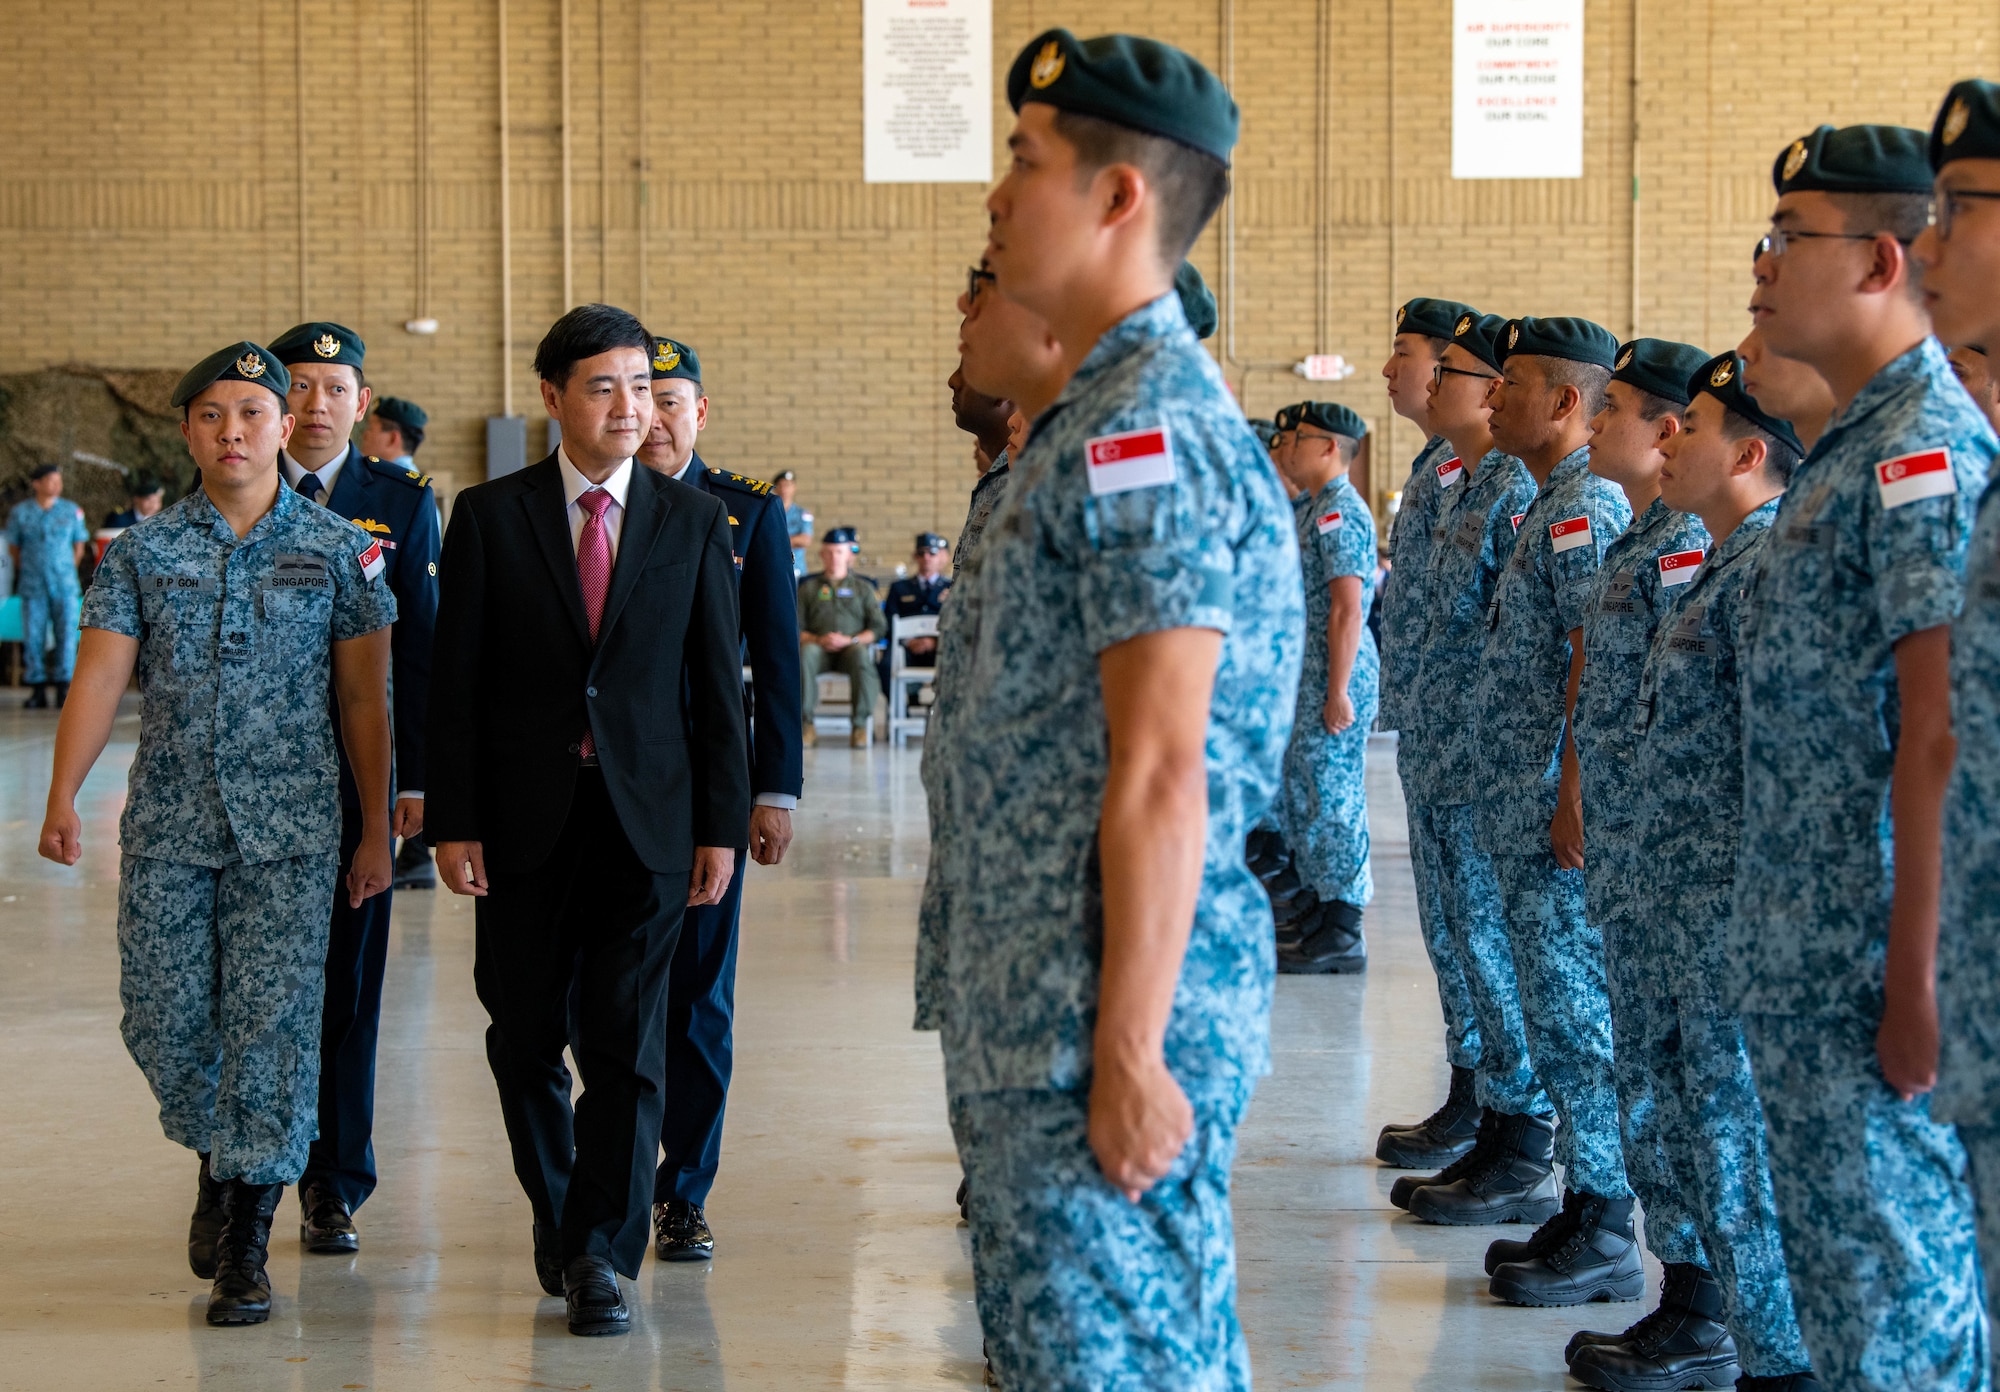 Heng Chee How, Republic of Singapore Senior Minister of State, performs a ceremonial inspection of 425th Fighter Squadron personnel during a parade ceremony, April 25, 2023, at Luke Air Force Base, Arizona.